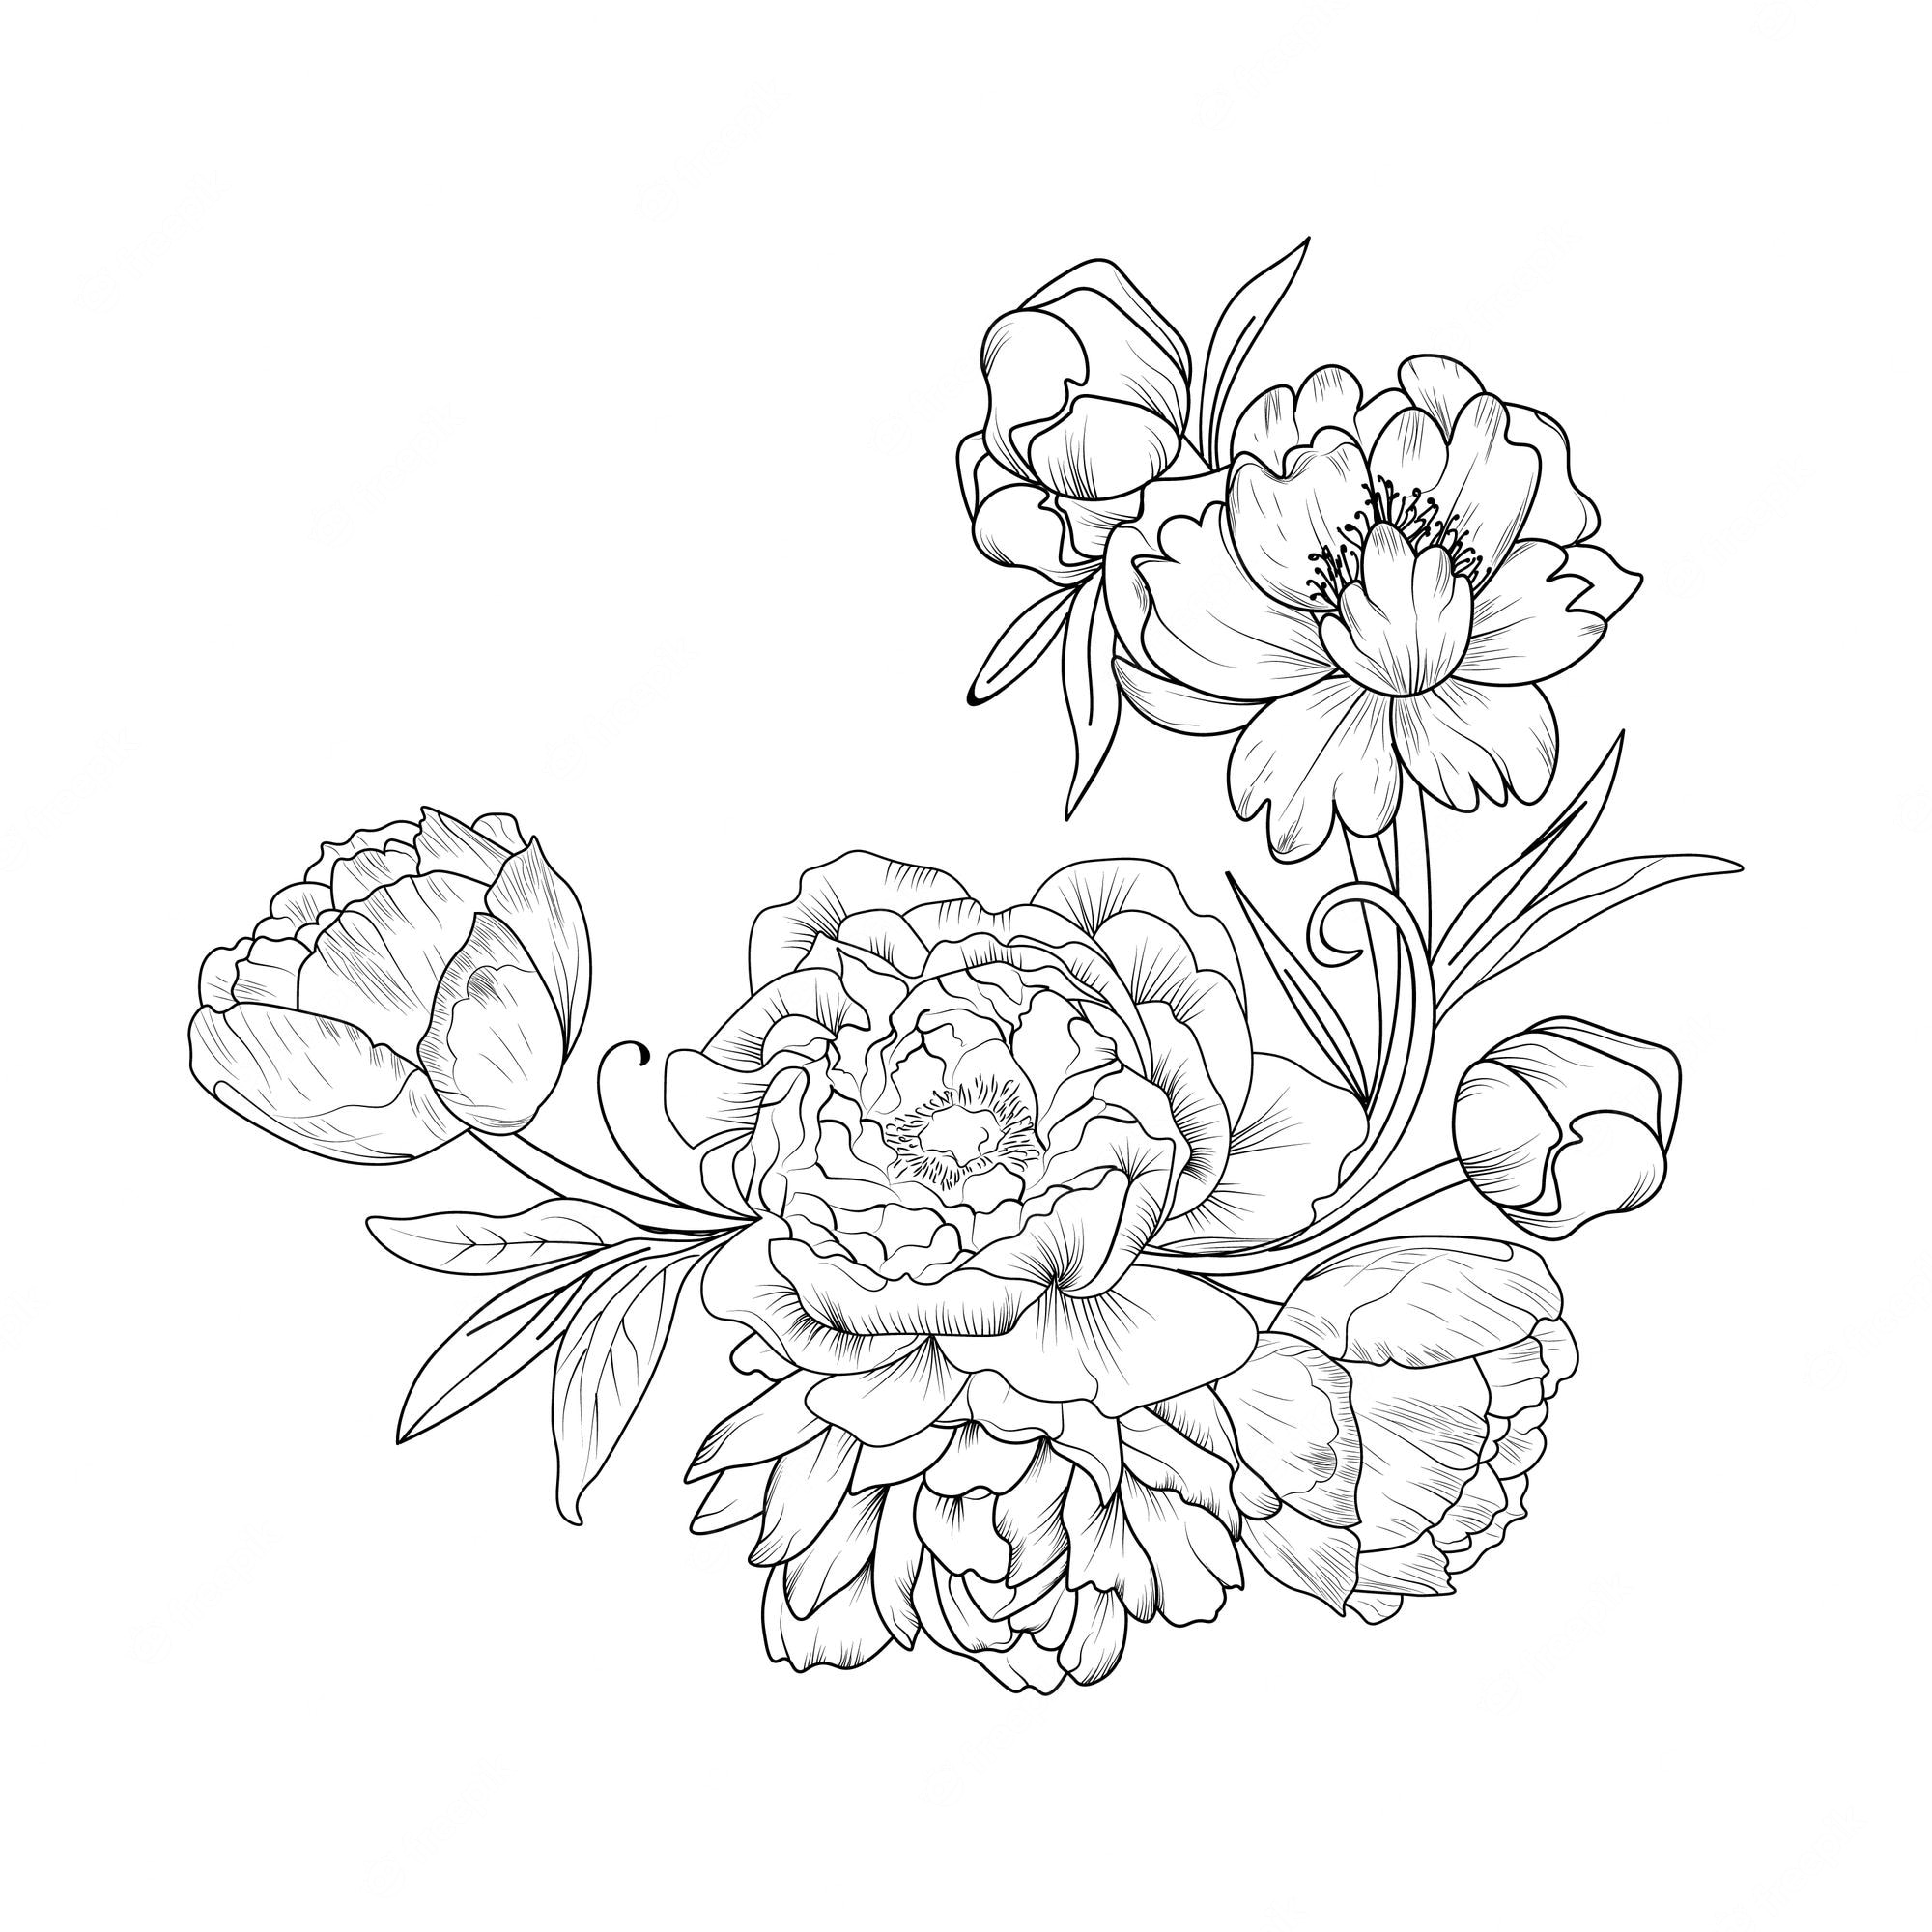 Premium Vector | Silhouettes of wildflowers from simple lines arts peony on  a white background design coloring book.